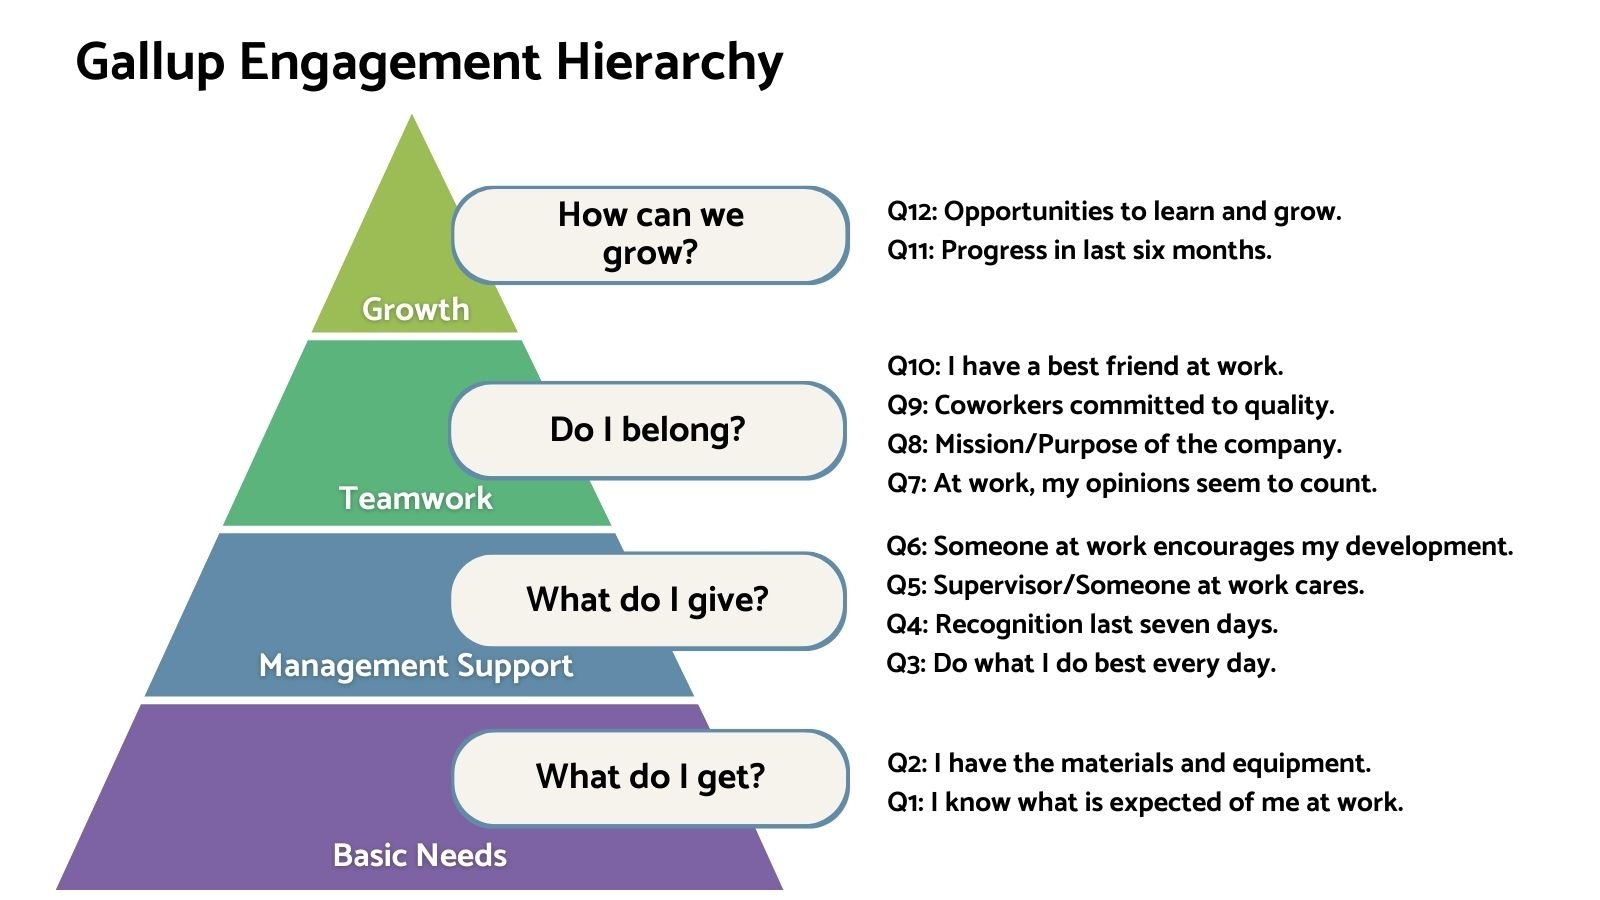 Gallup Engagement Hierarchy